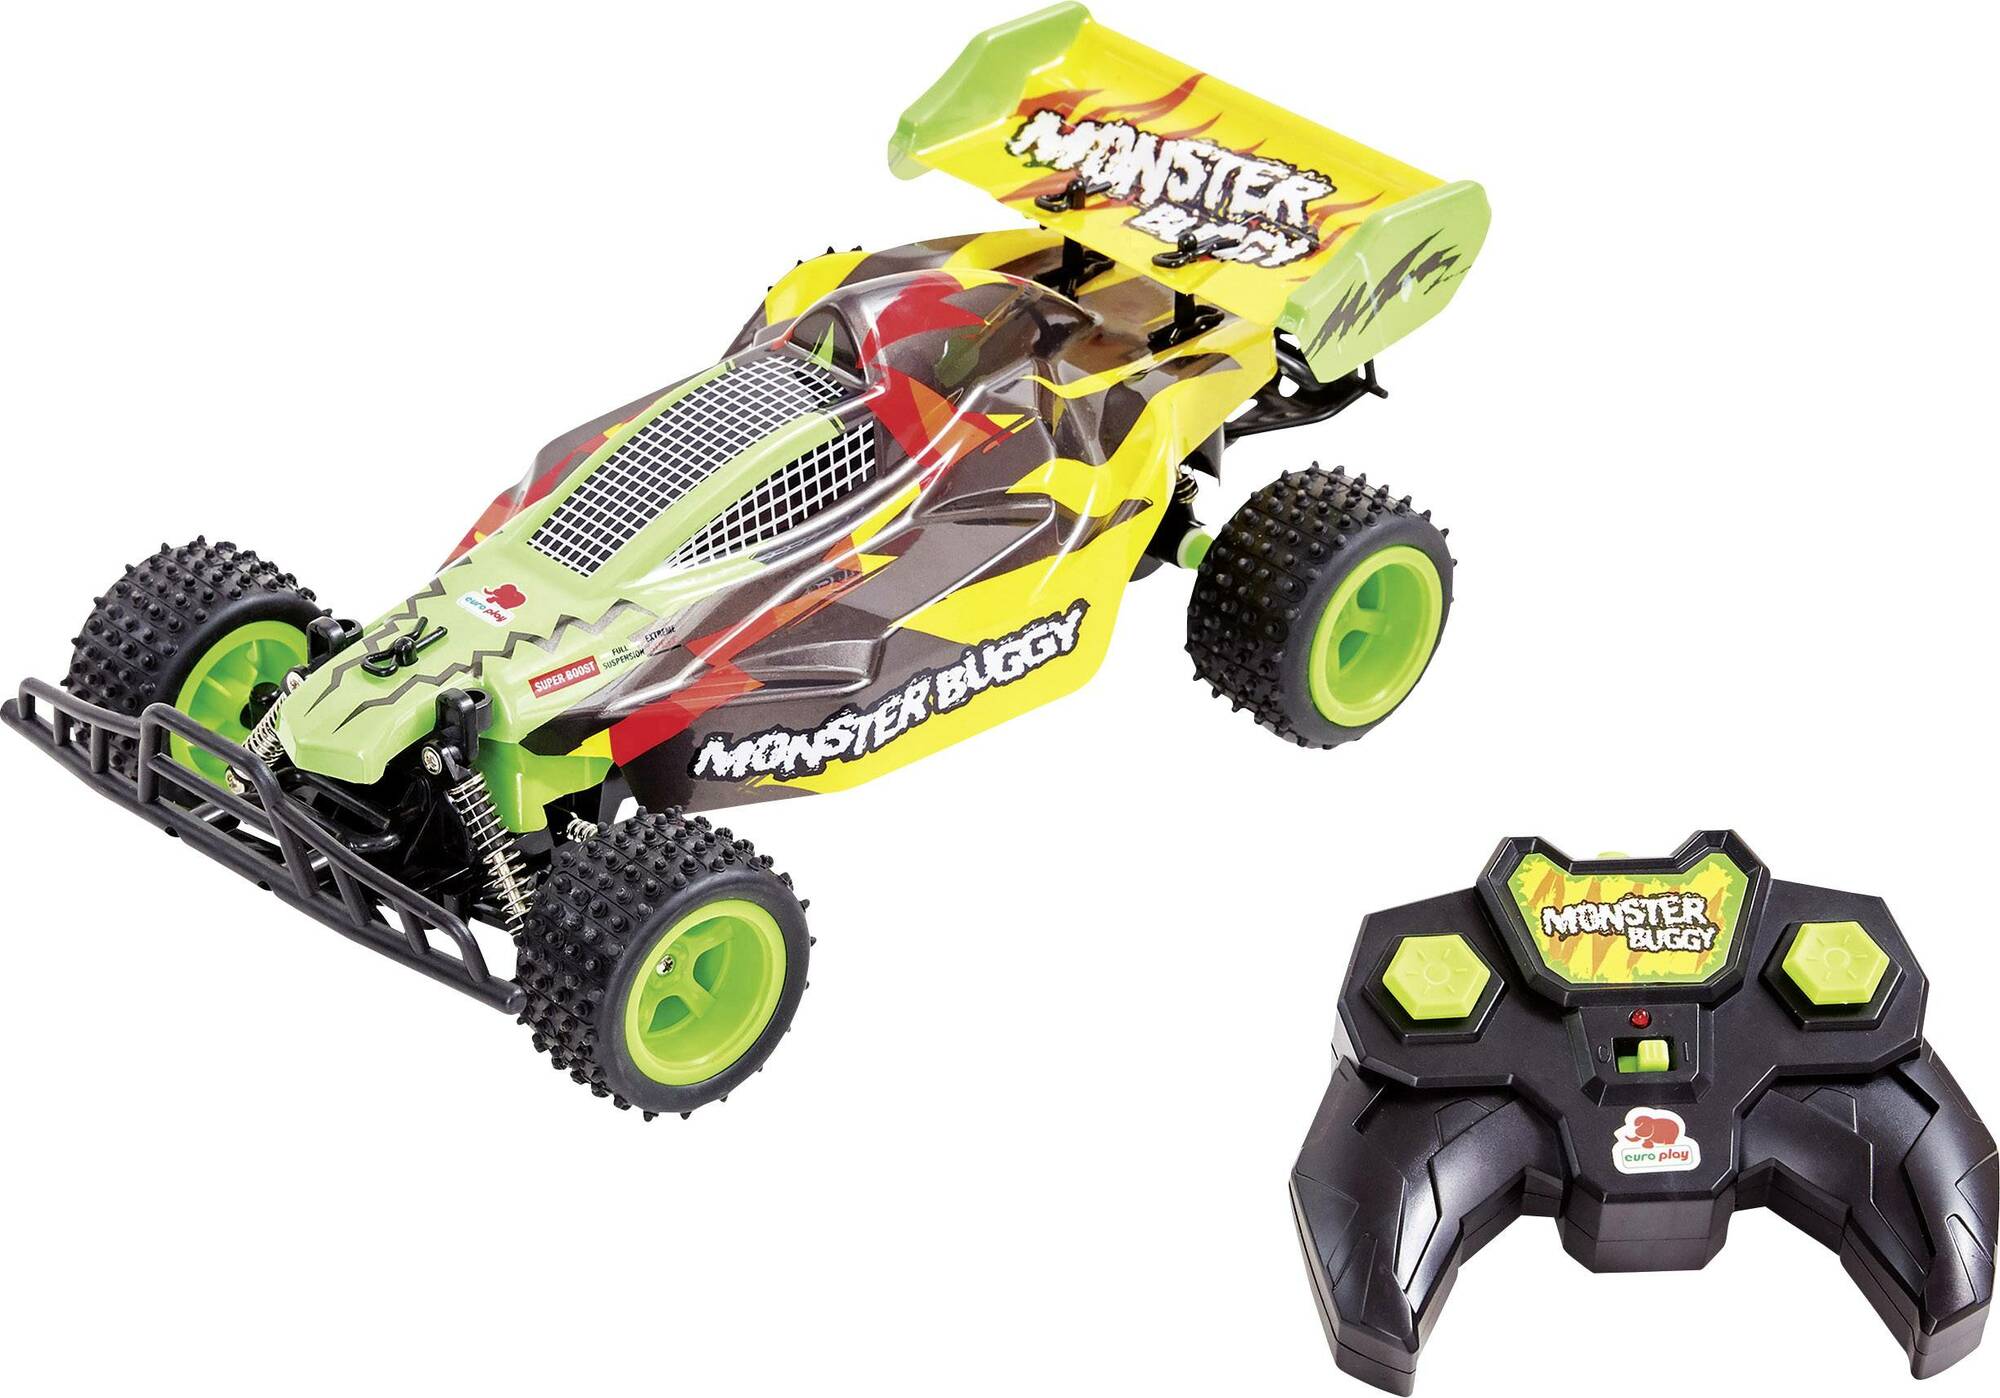 RC Monster Buggy